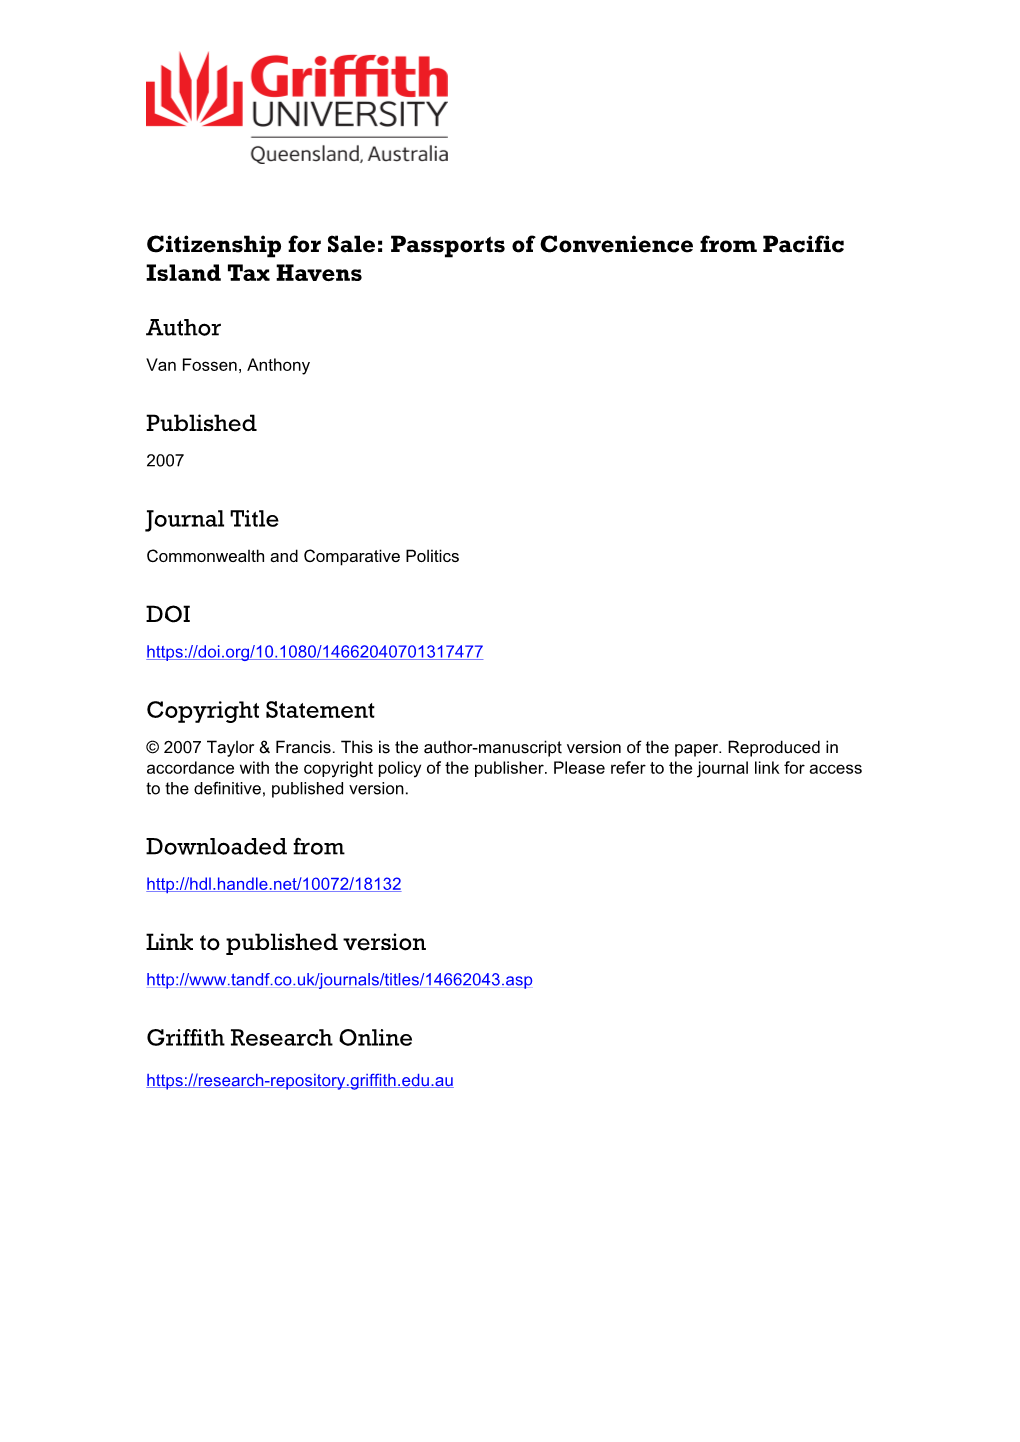 Volume 45, Number 2, Pages 138-163. Citizenship for Sale